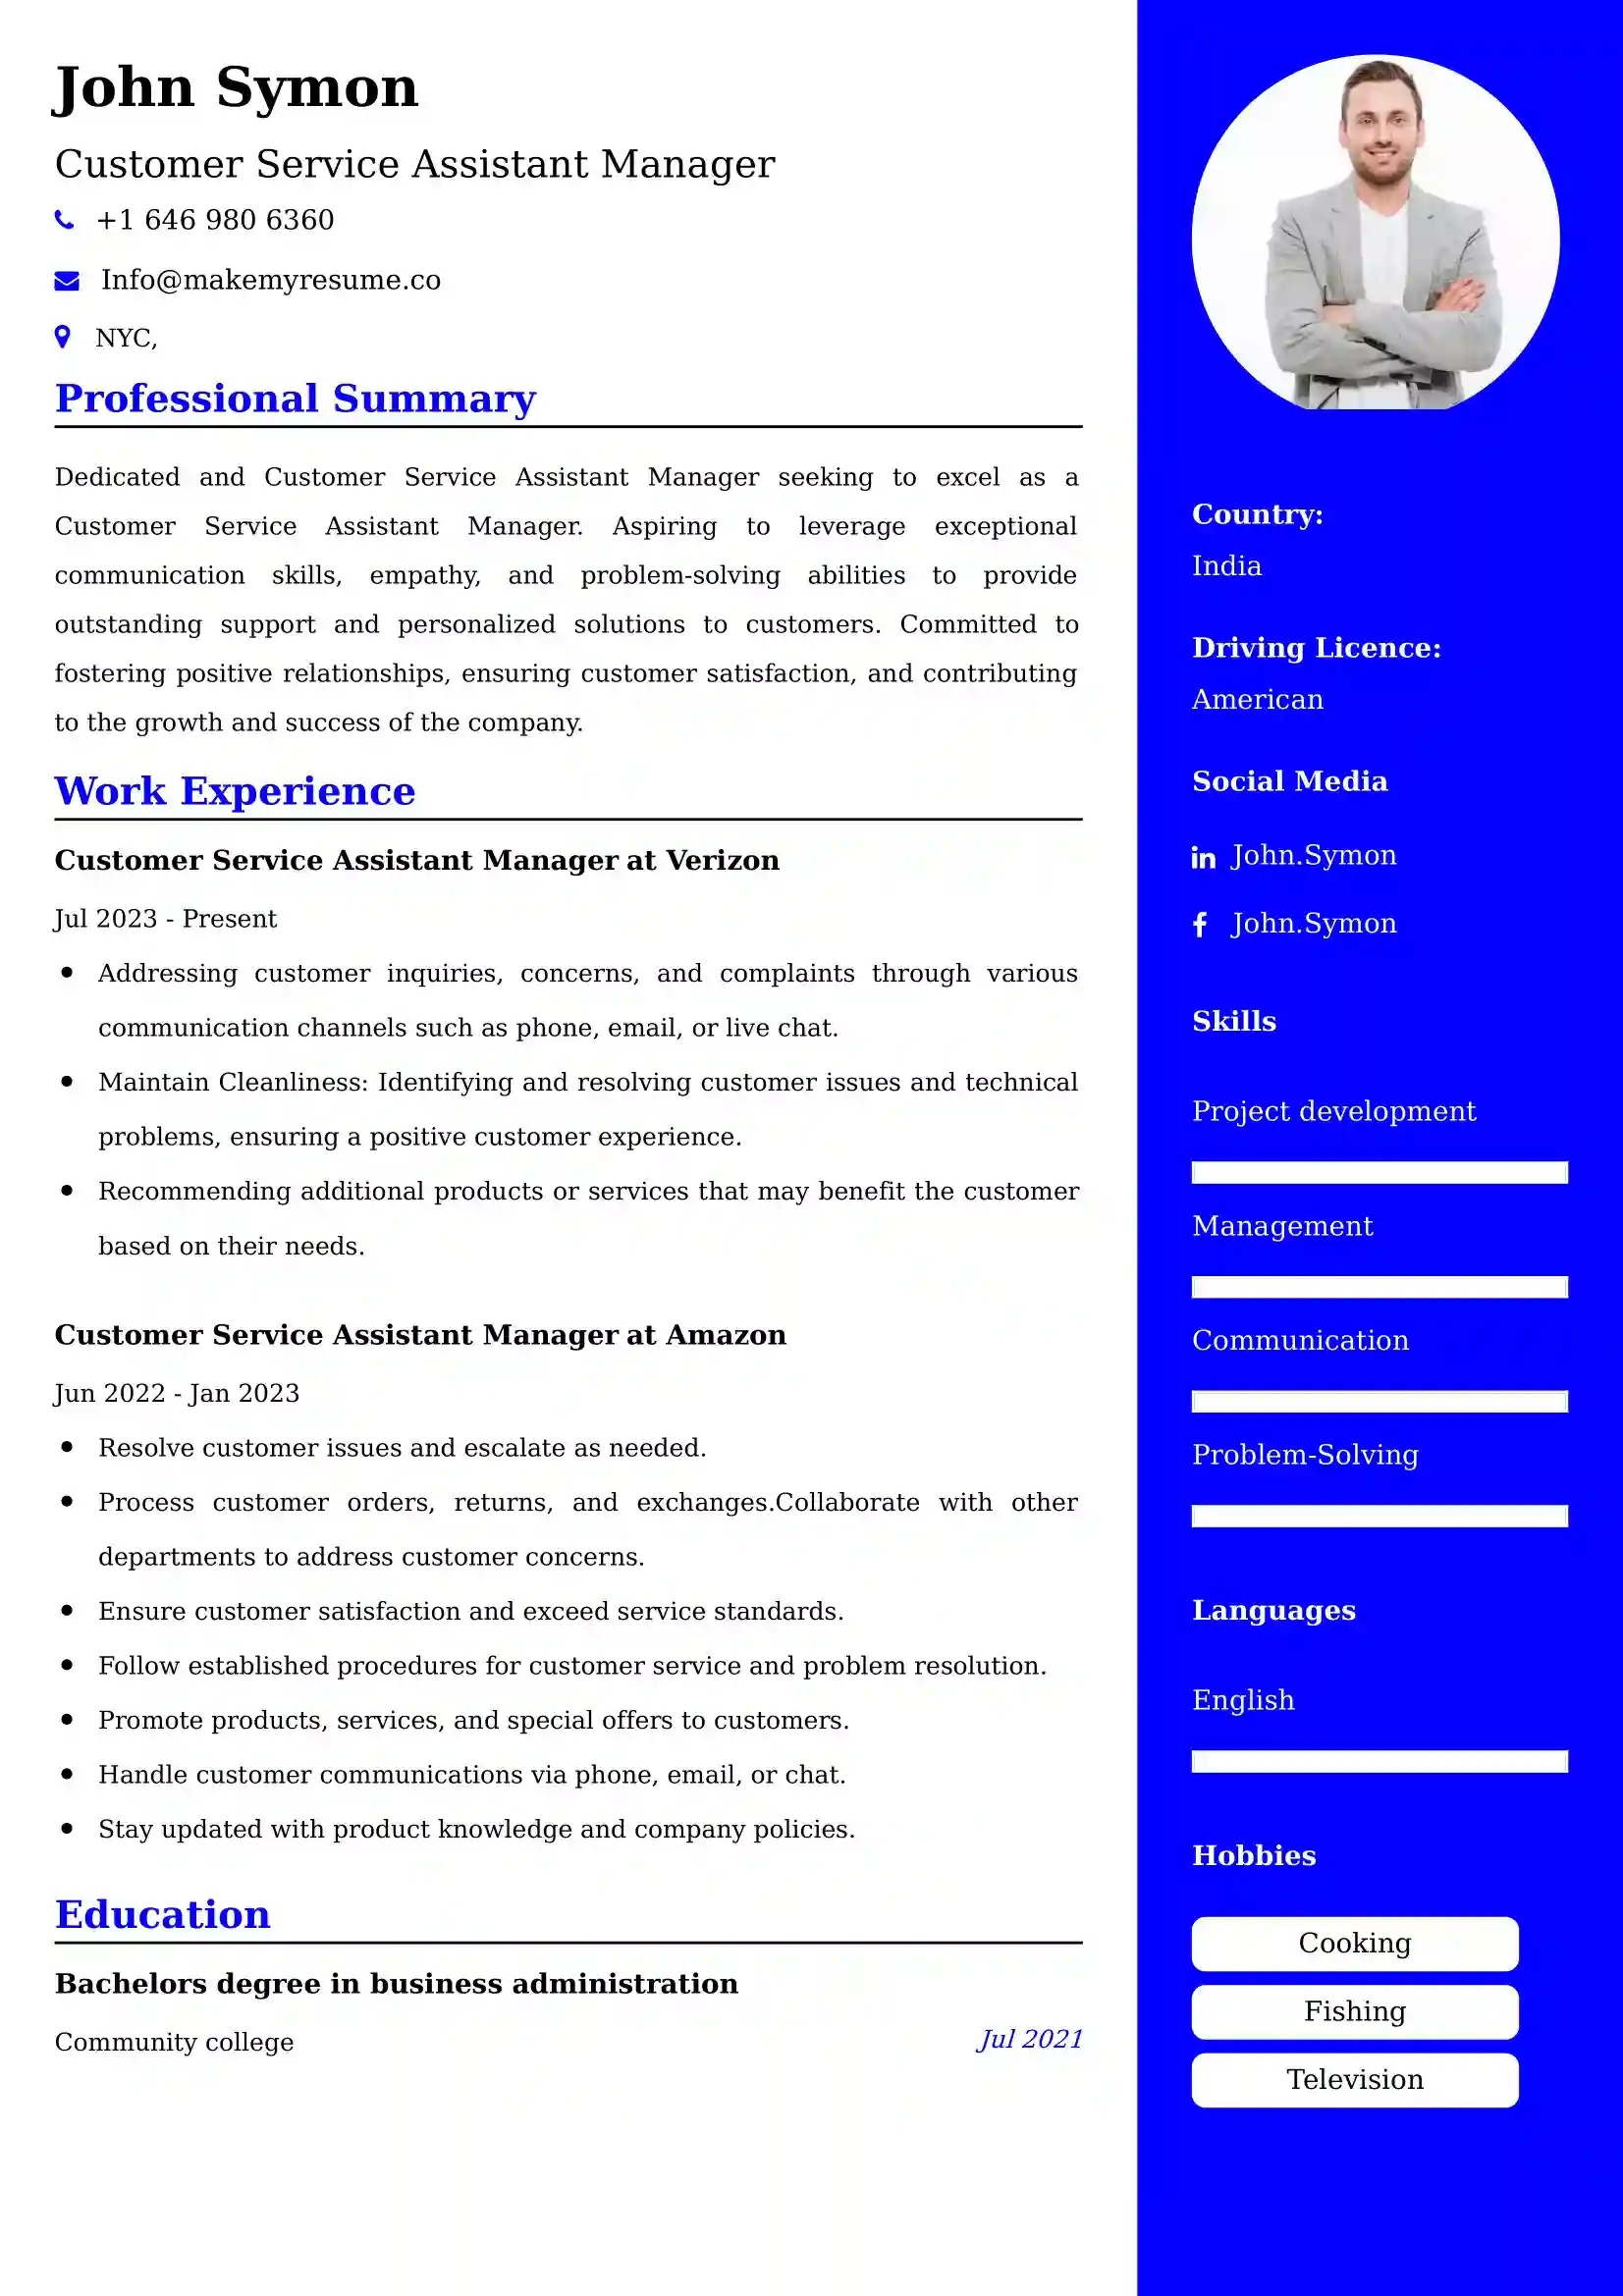 Customer Service Assistant Manager Resume Examples - UK Format, Latest Template.